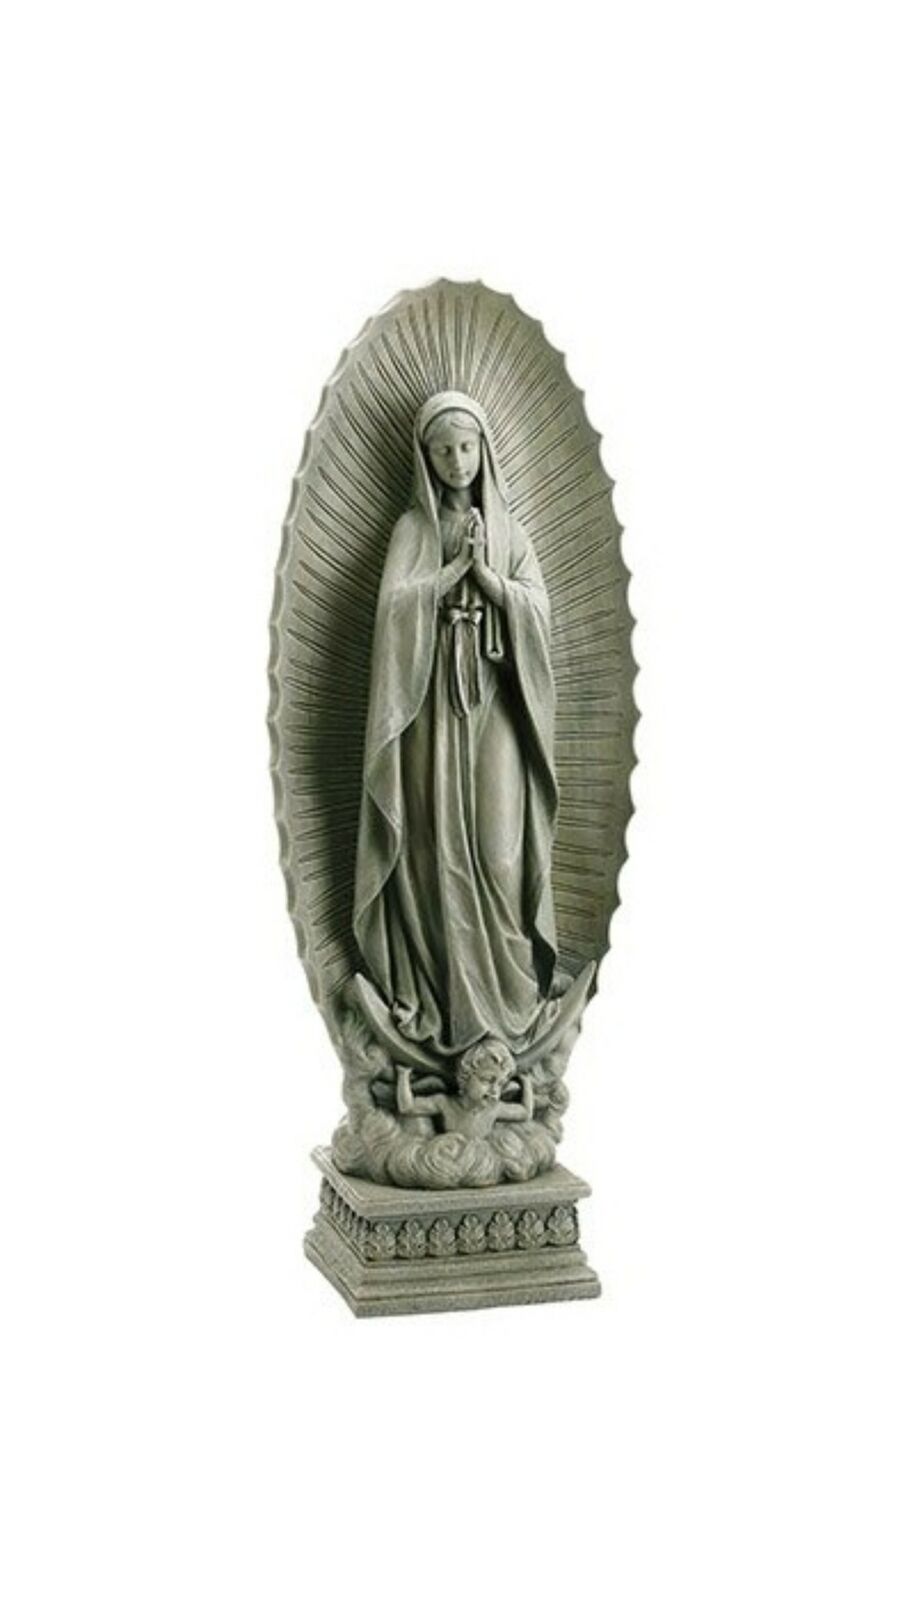 N.G. Catholic Our Lady of Guadalupe Resin Garden Statue, 37 1/2 Inch